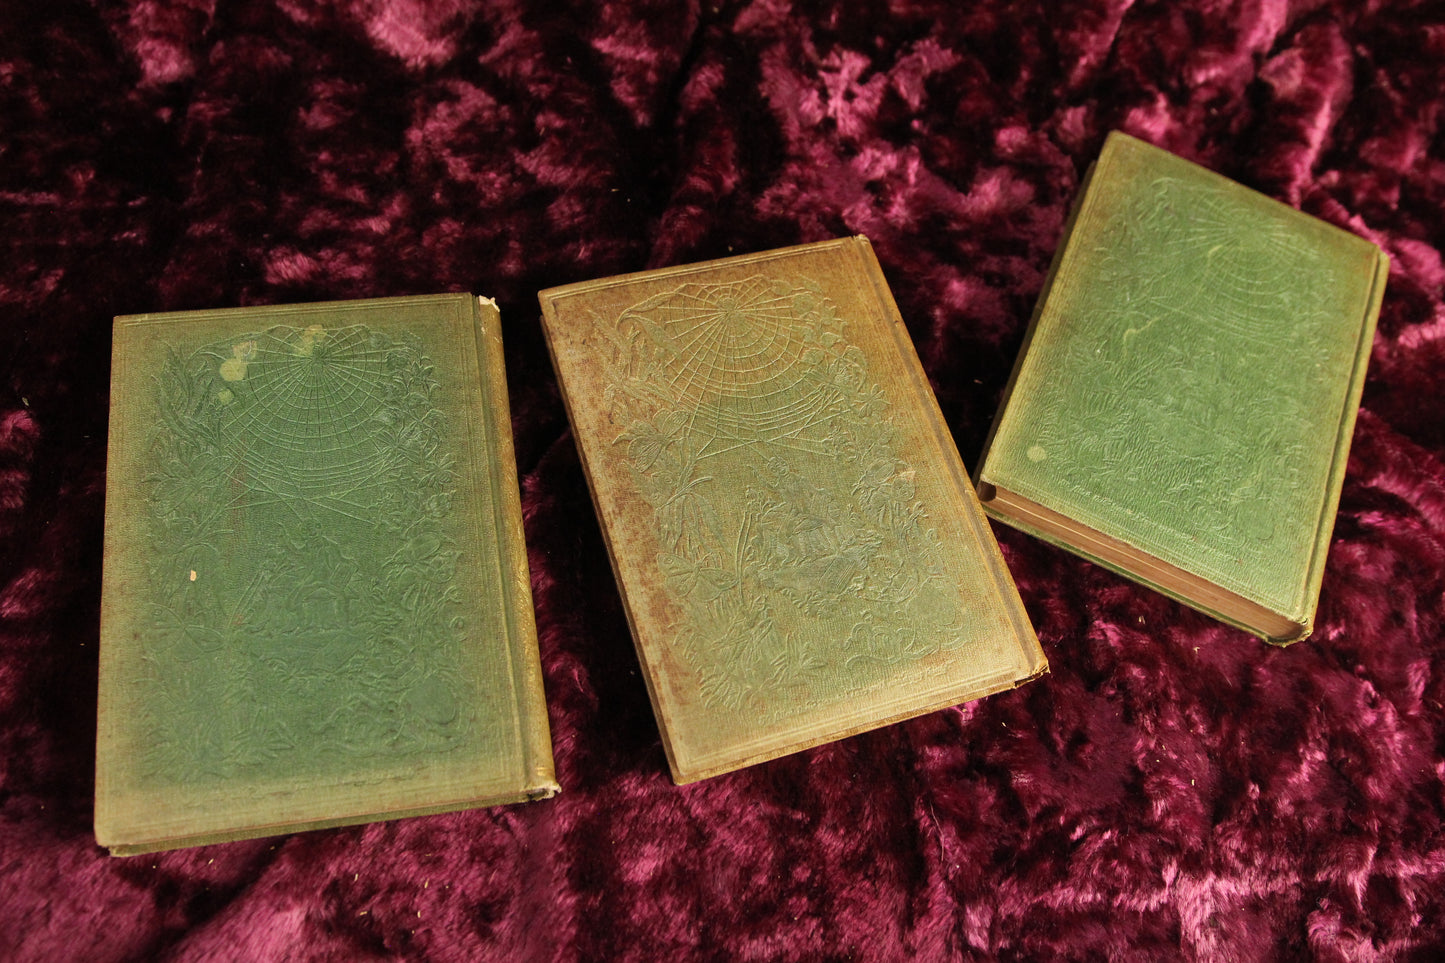 Episodes of Insect Life, Three Volume Set by L.M. Budgen, 1851, First American Edition